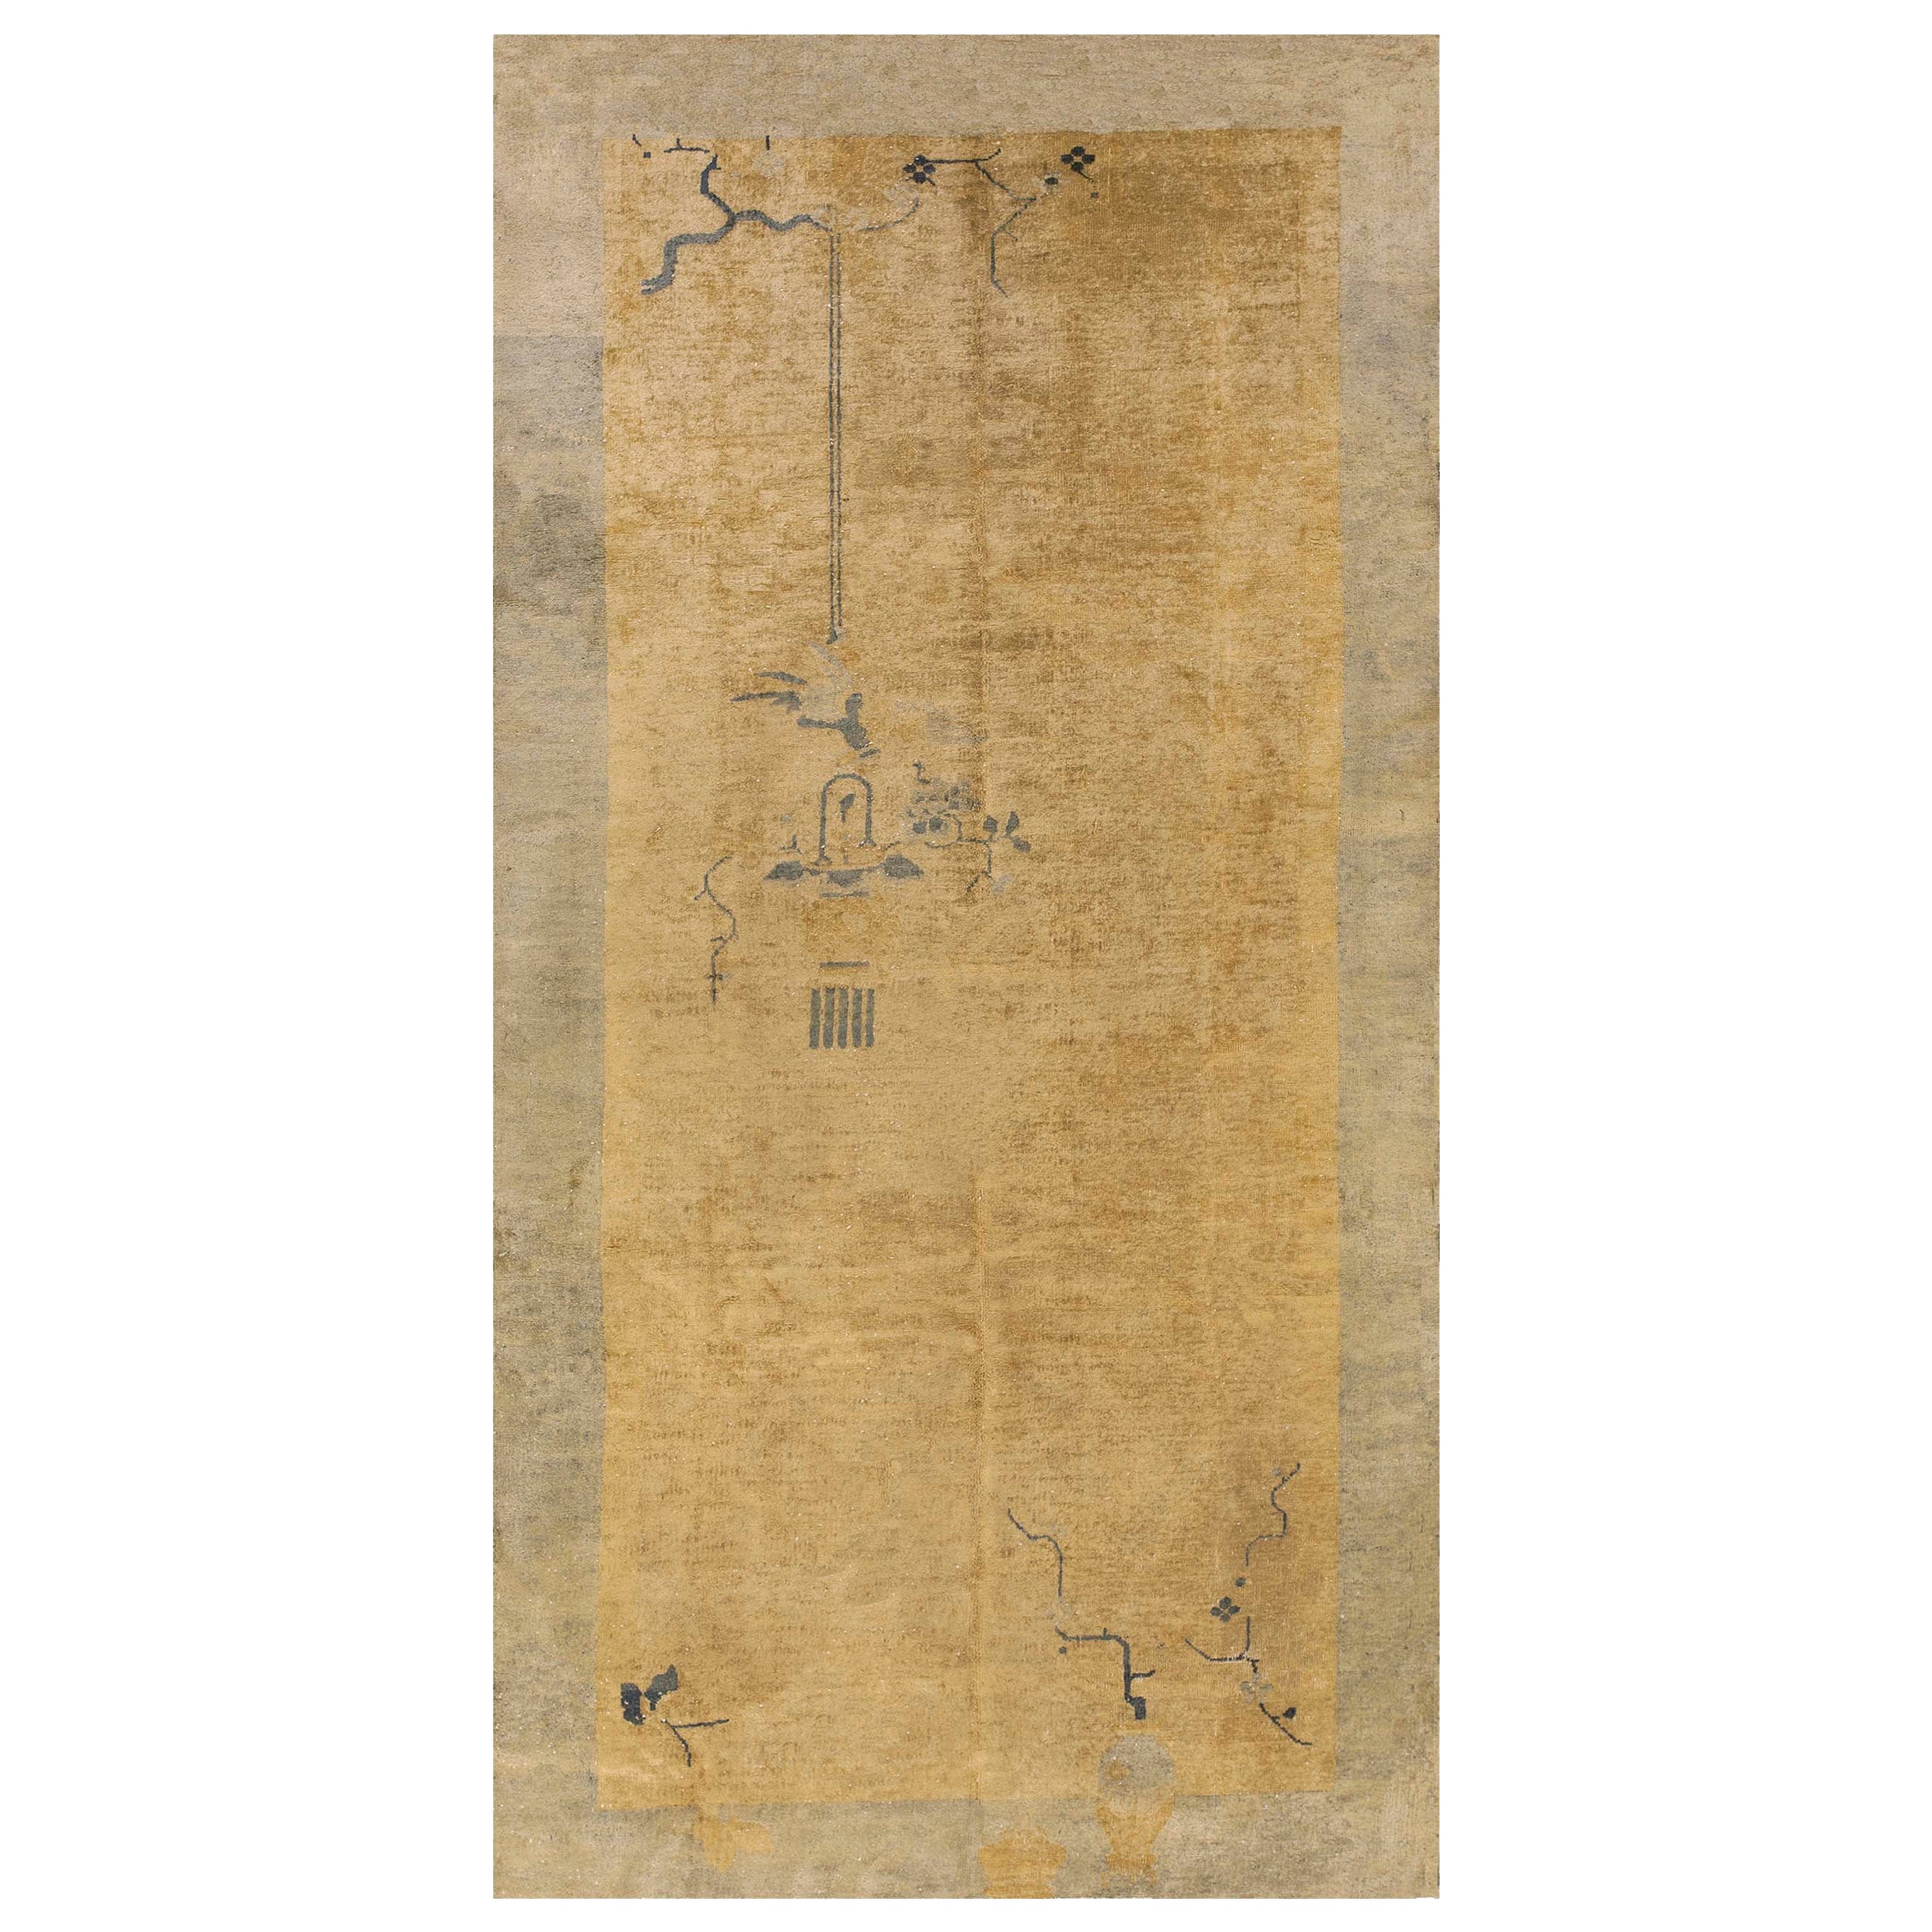 Chinese Art Deco Gallery Carpet ( 5' 2" x 10' 2" - 157 x 309 cm ) For Sale